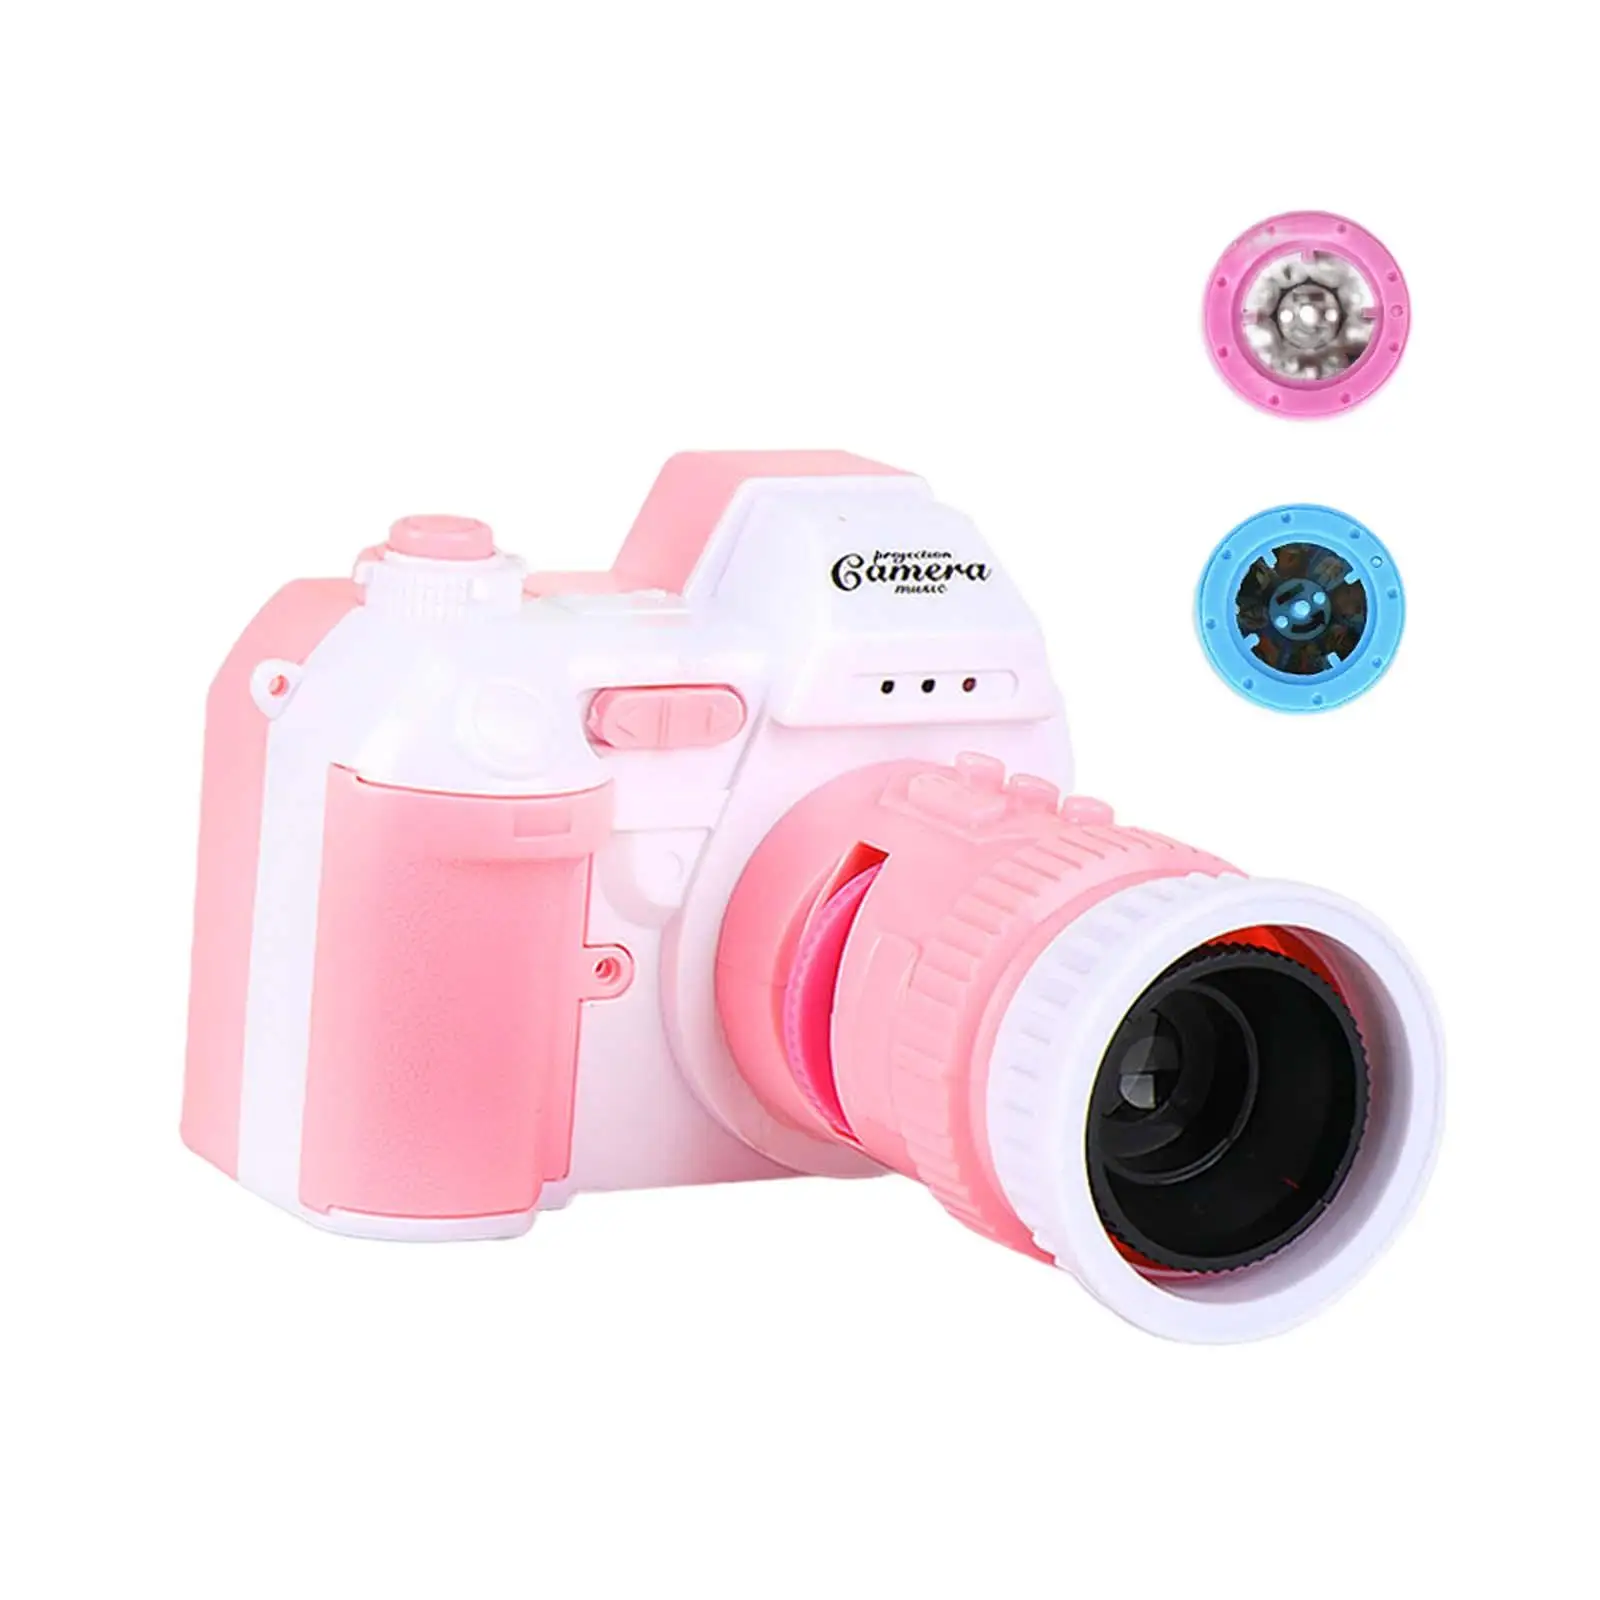 Portable Projection Camera Toy Early Learning for Holiday Birthday Gifts